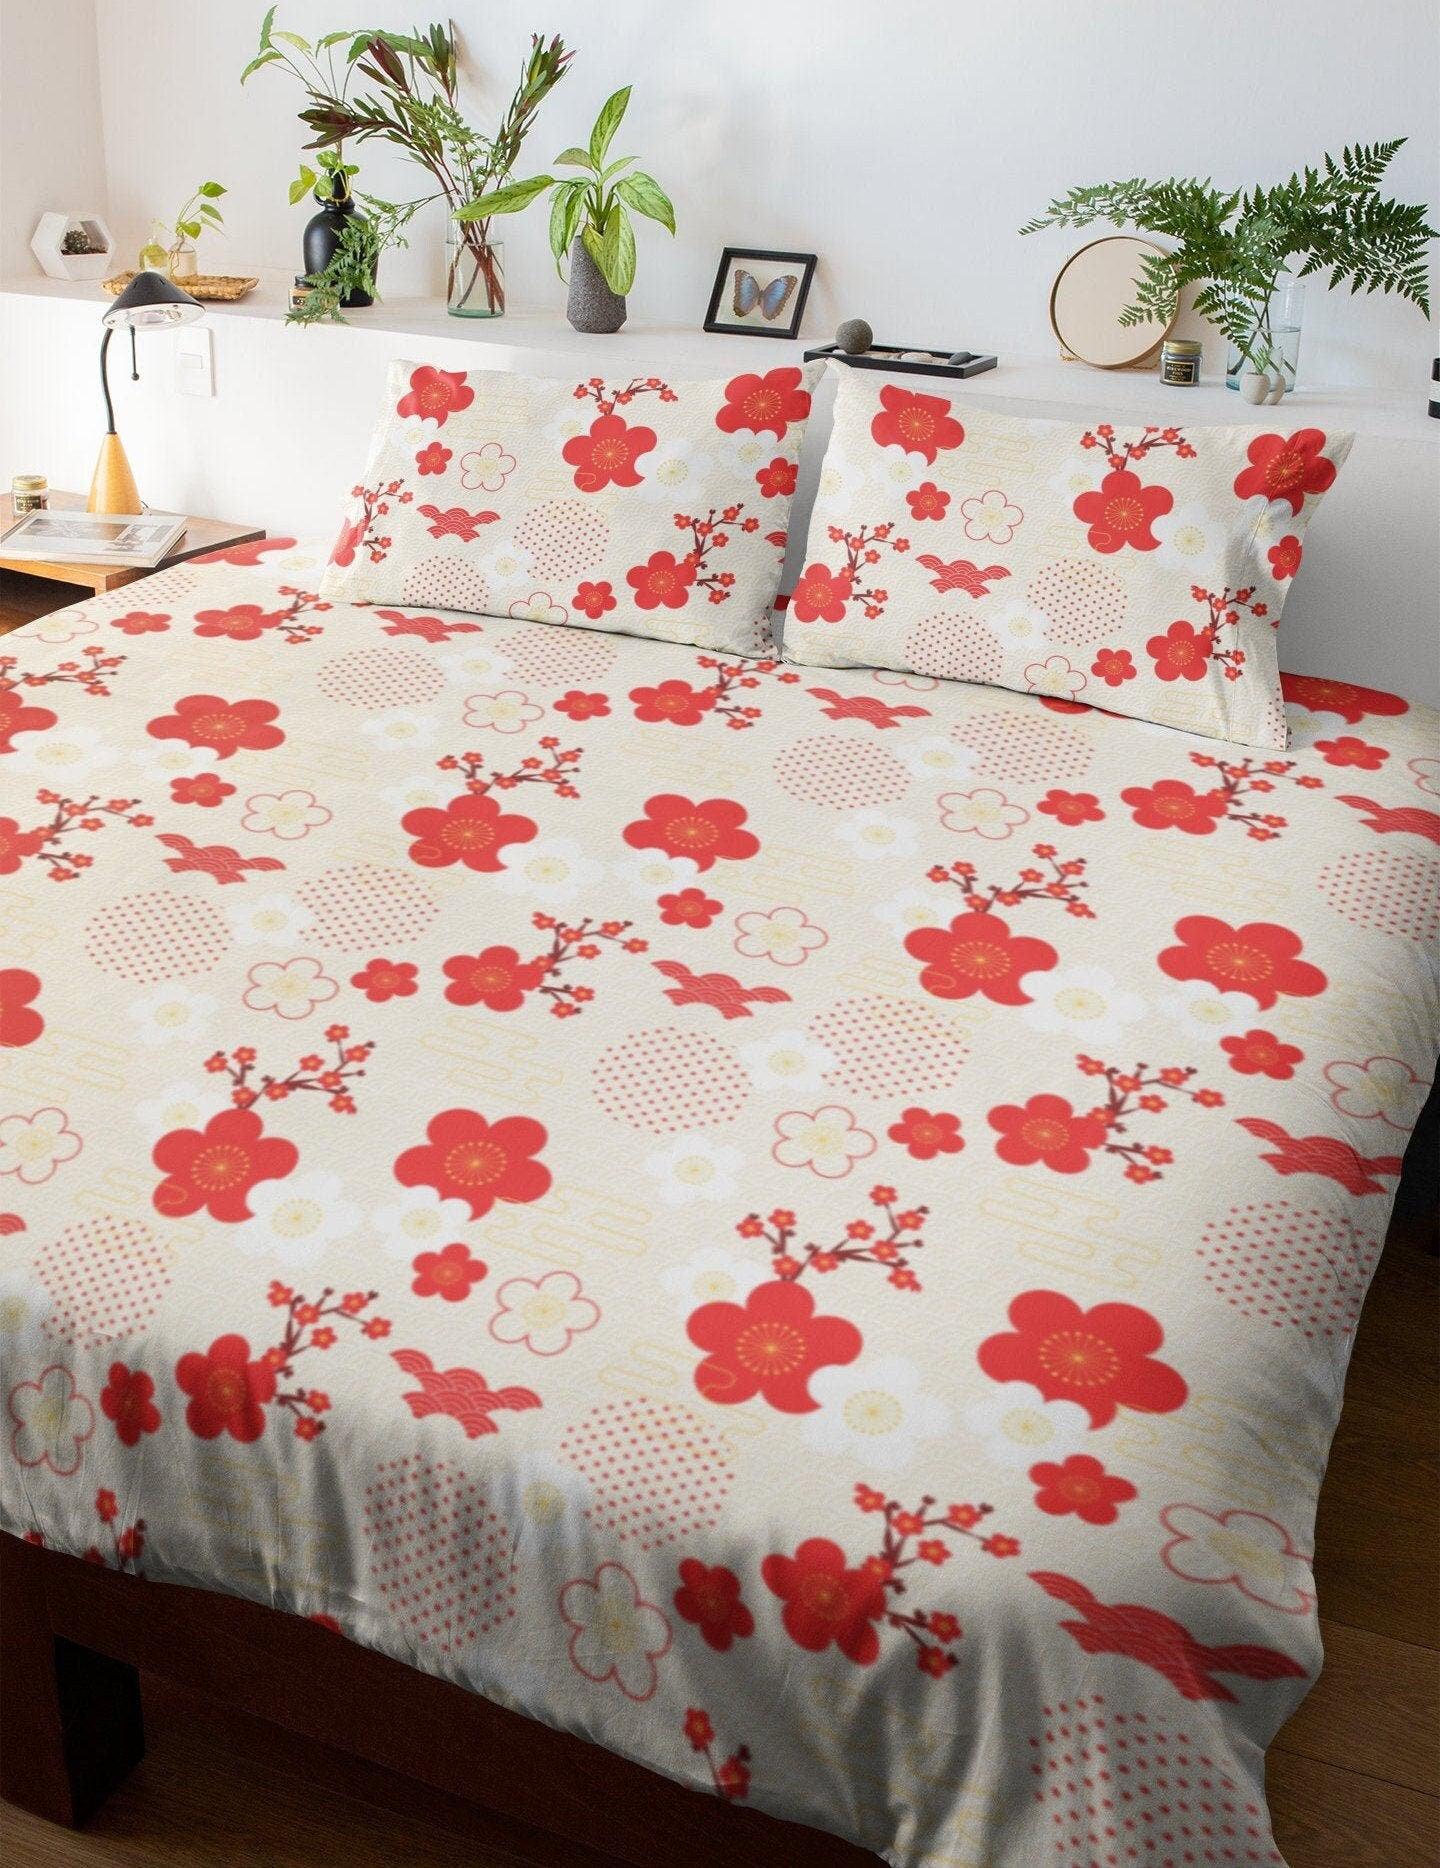 daintyduvet Japanese Cherry blossoms Duvet Cover Set Floral Prints | Bedding Set with Pillow Cover Case